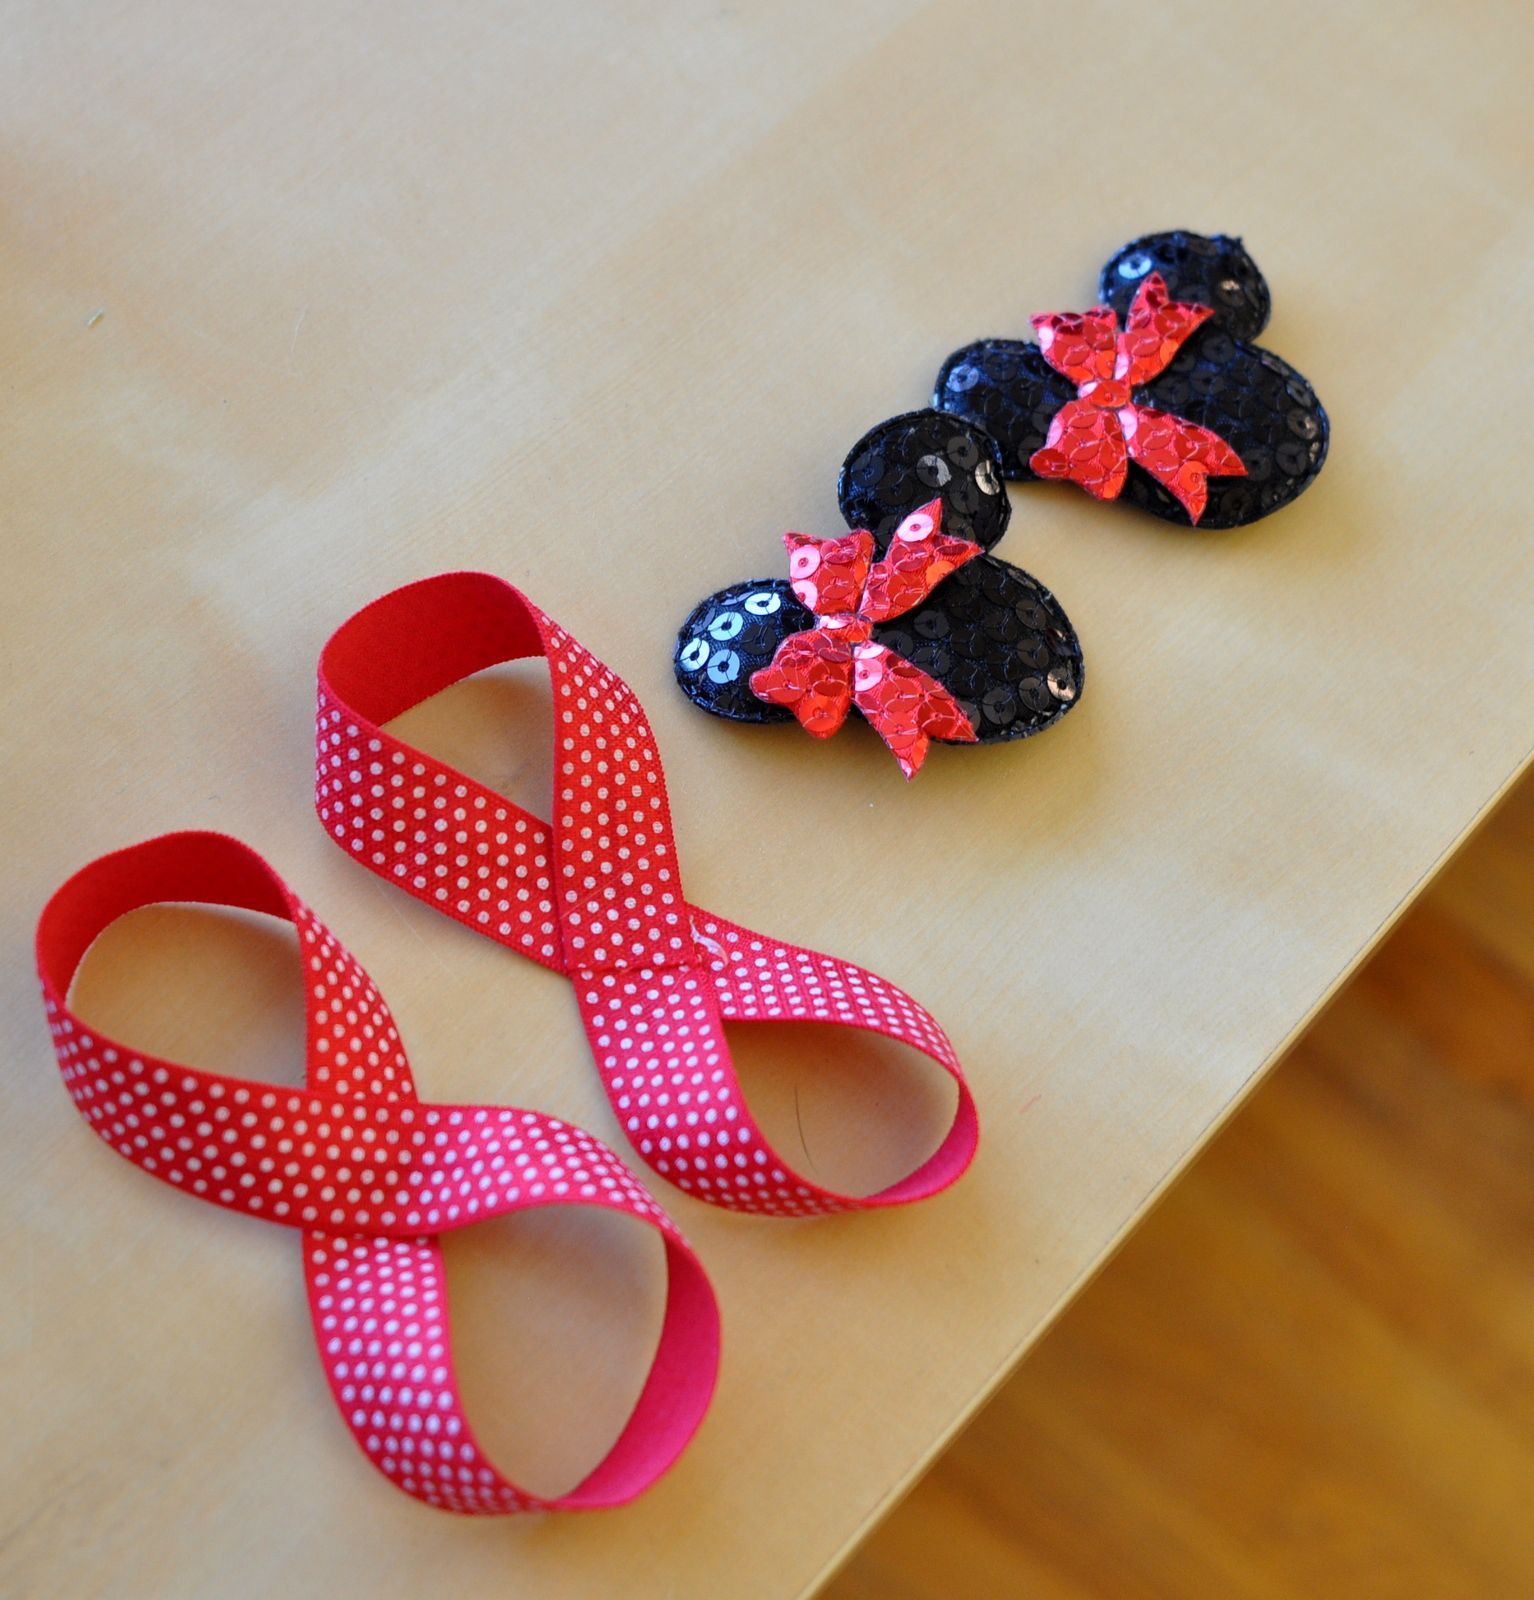 DIY Barefoot Baby Sandals
 Baby Barefoot Sandals Tutorial Projects